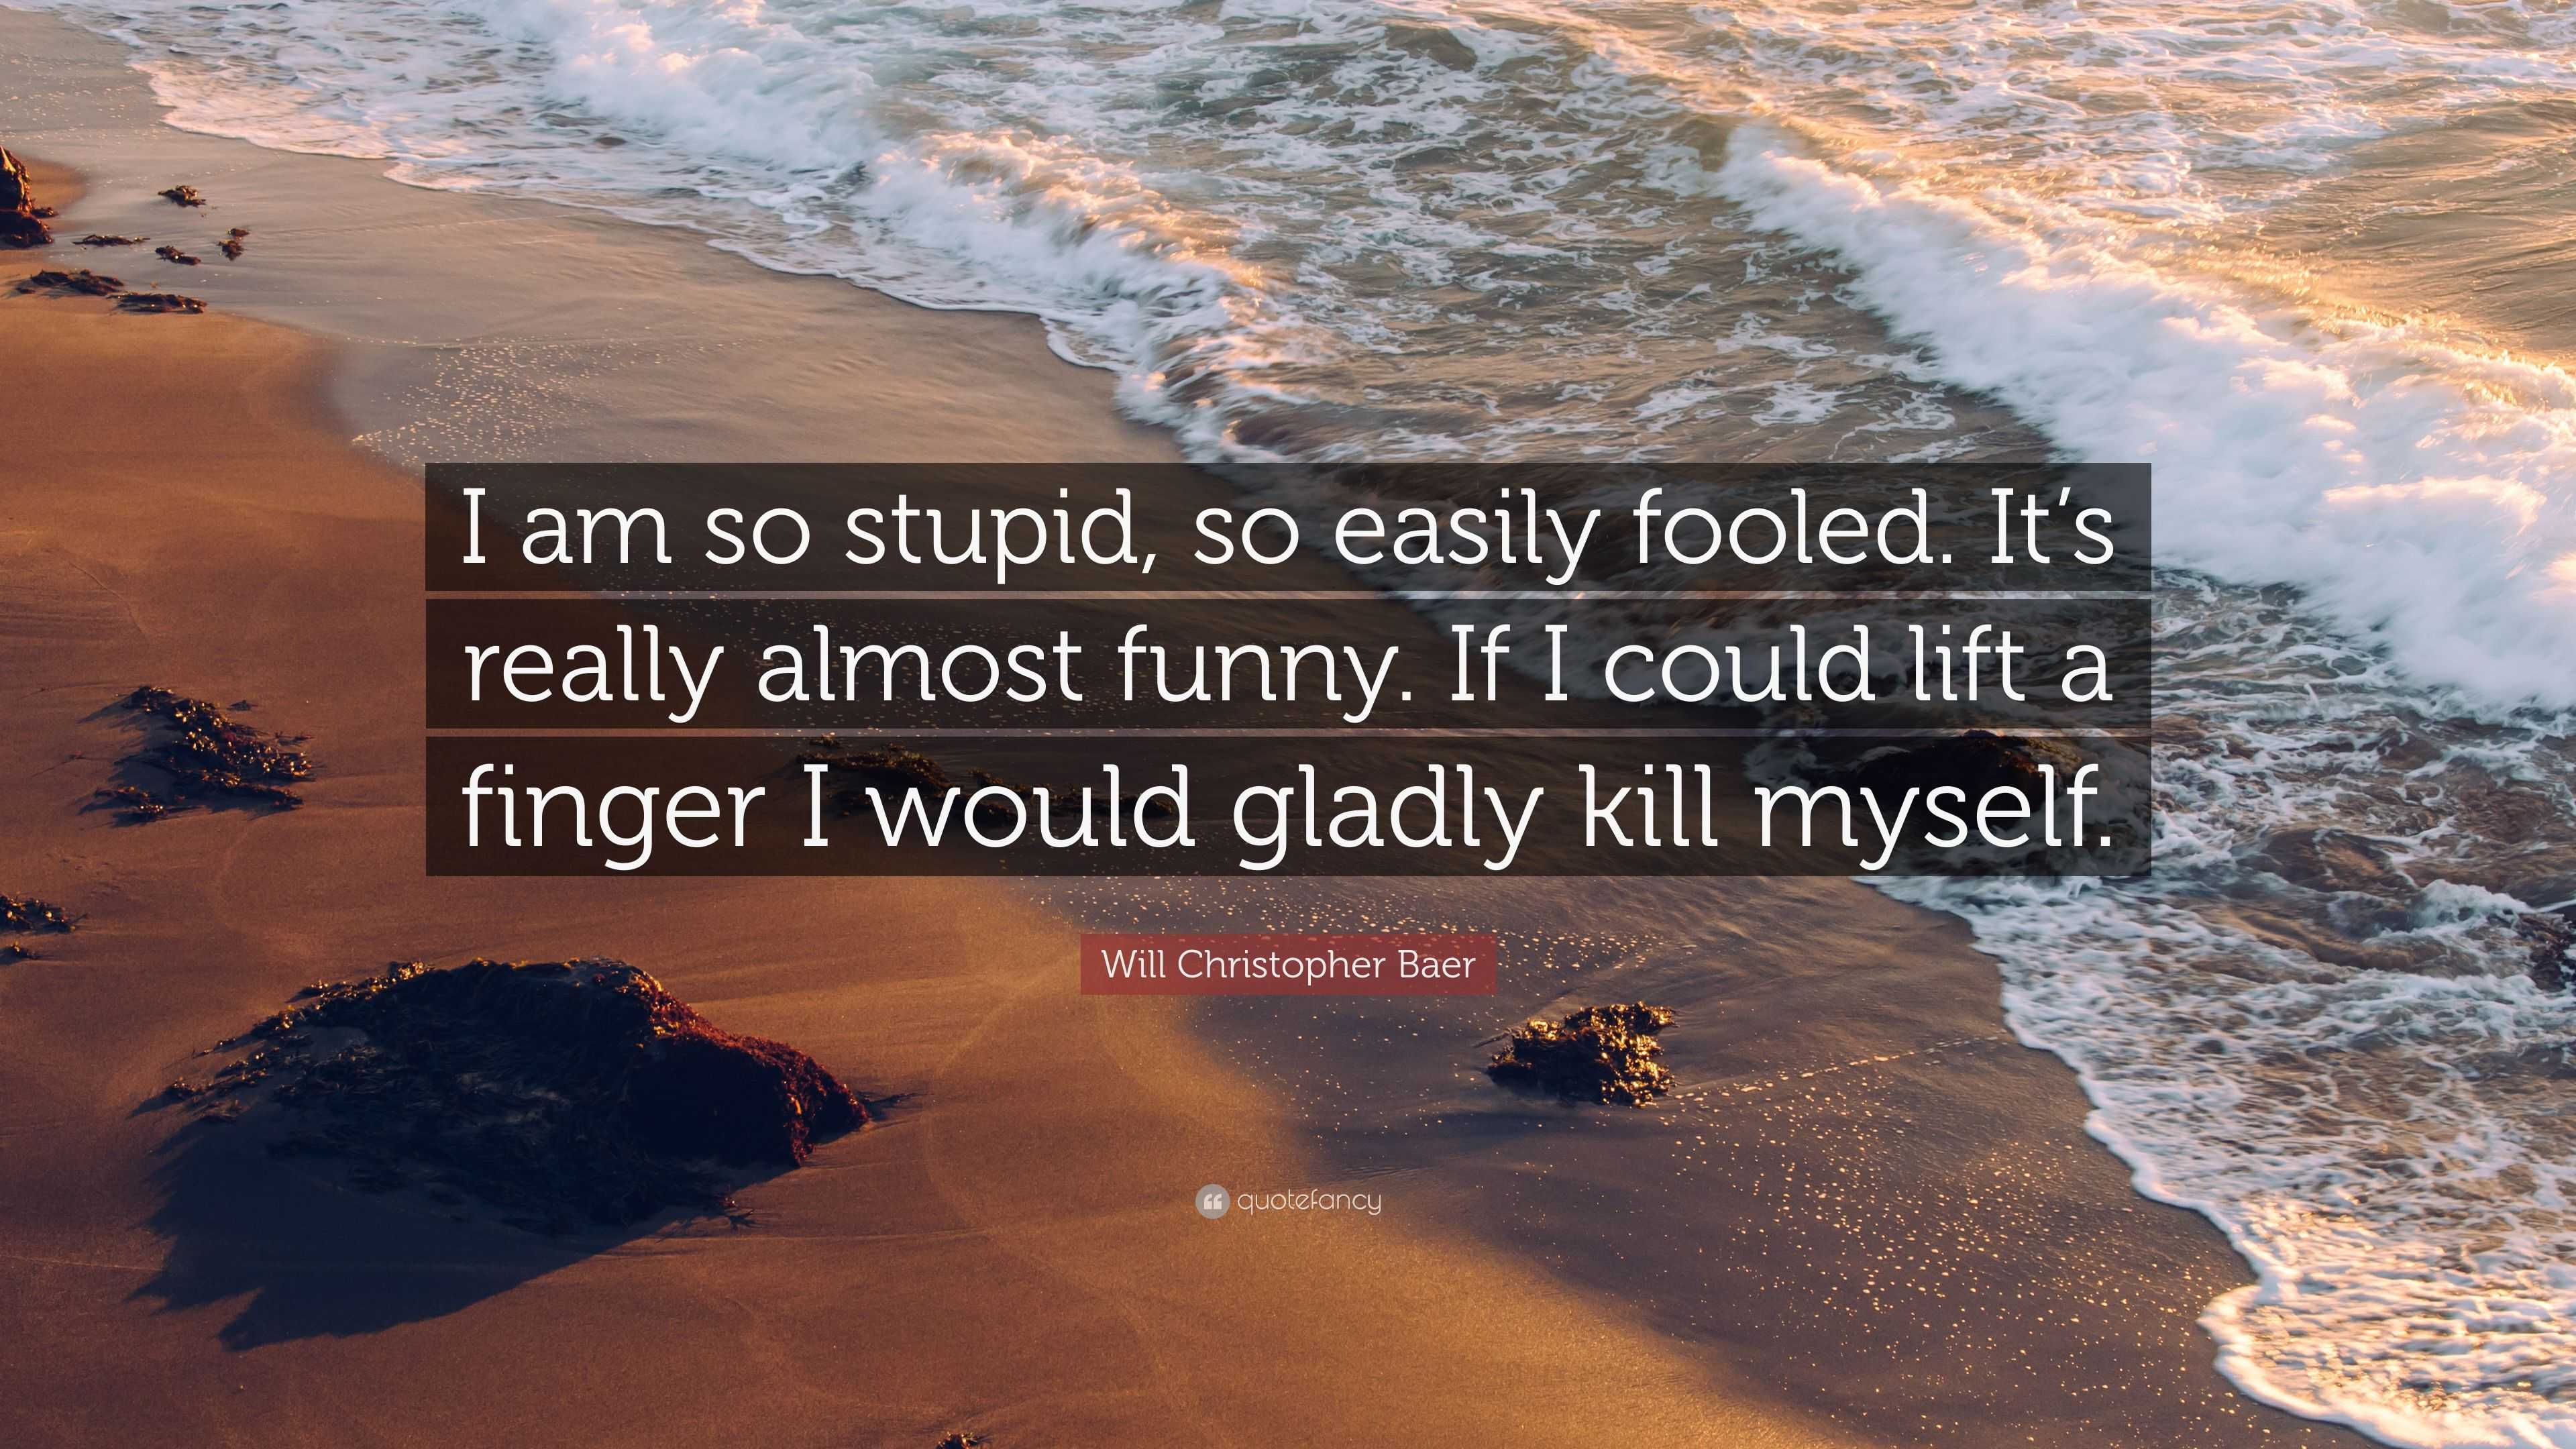 Will Christopher Baer Quote: "I am so stupid, so easily fooled. It's really almost funny. If I ...